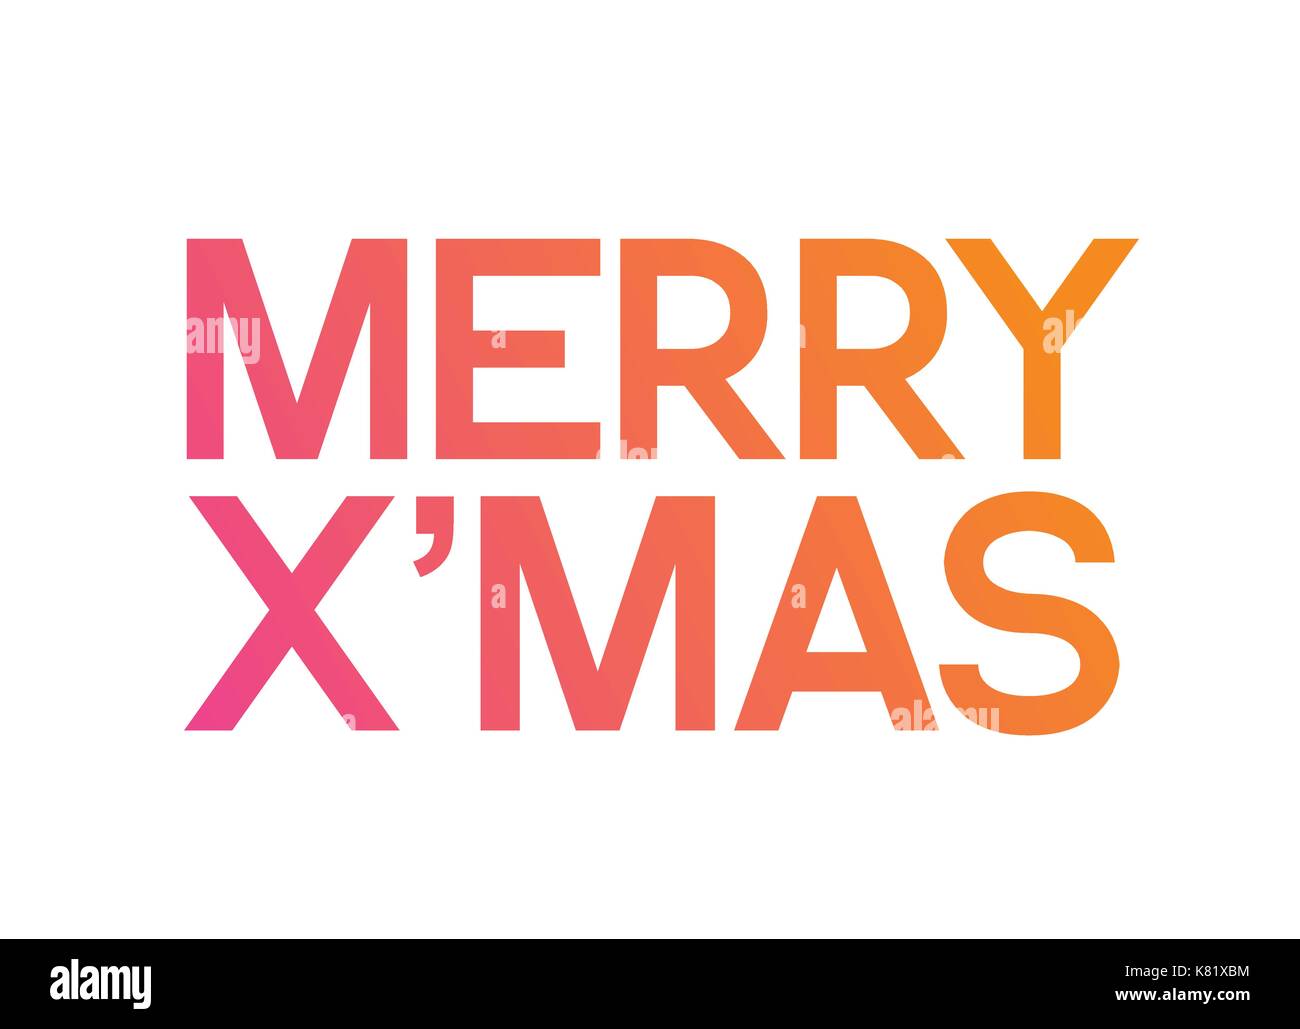 The Gradient pink to orange serif front word Merry Christmas Stock Vector